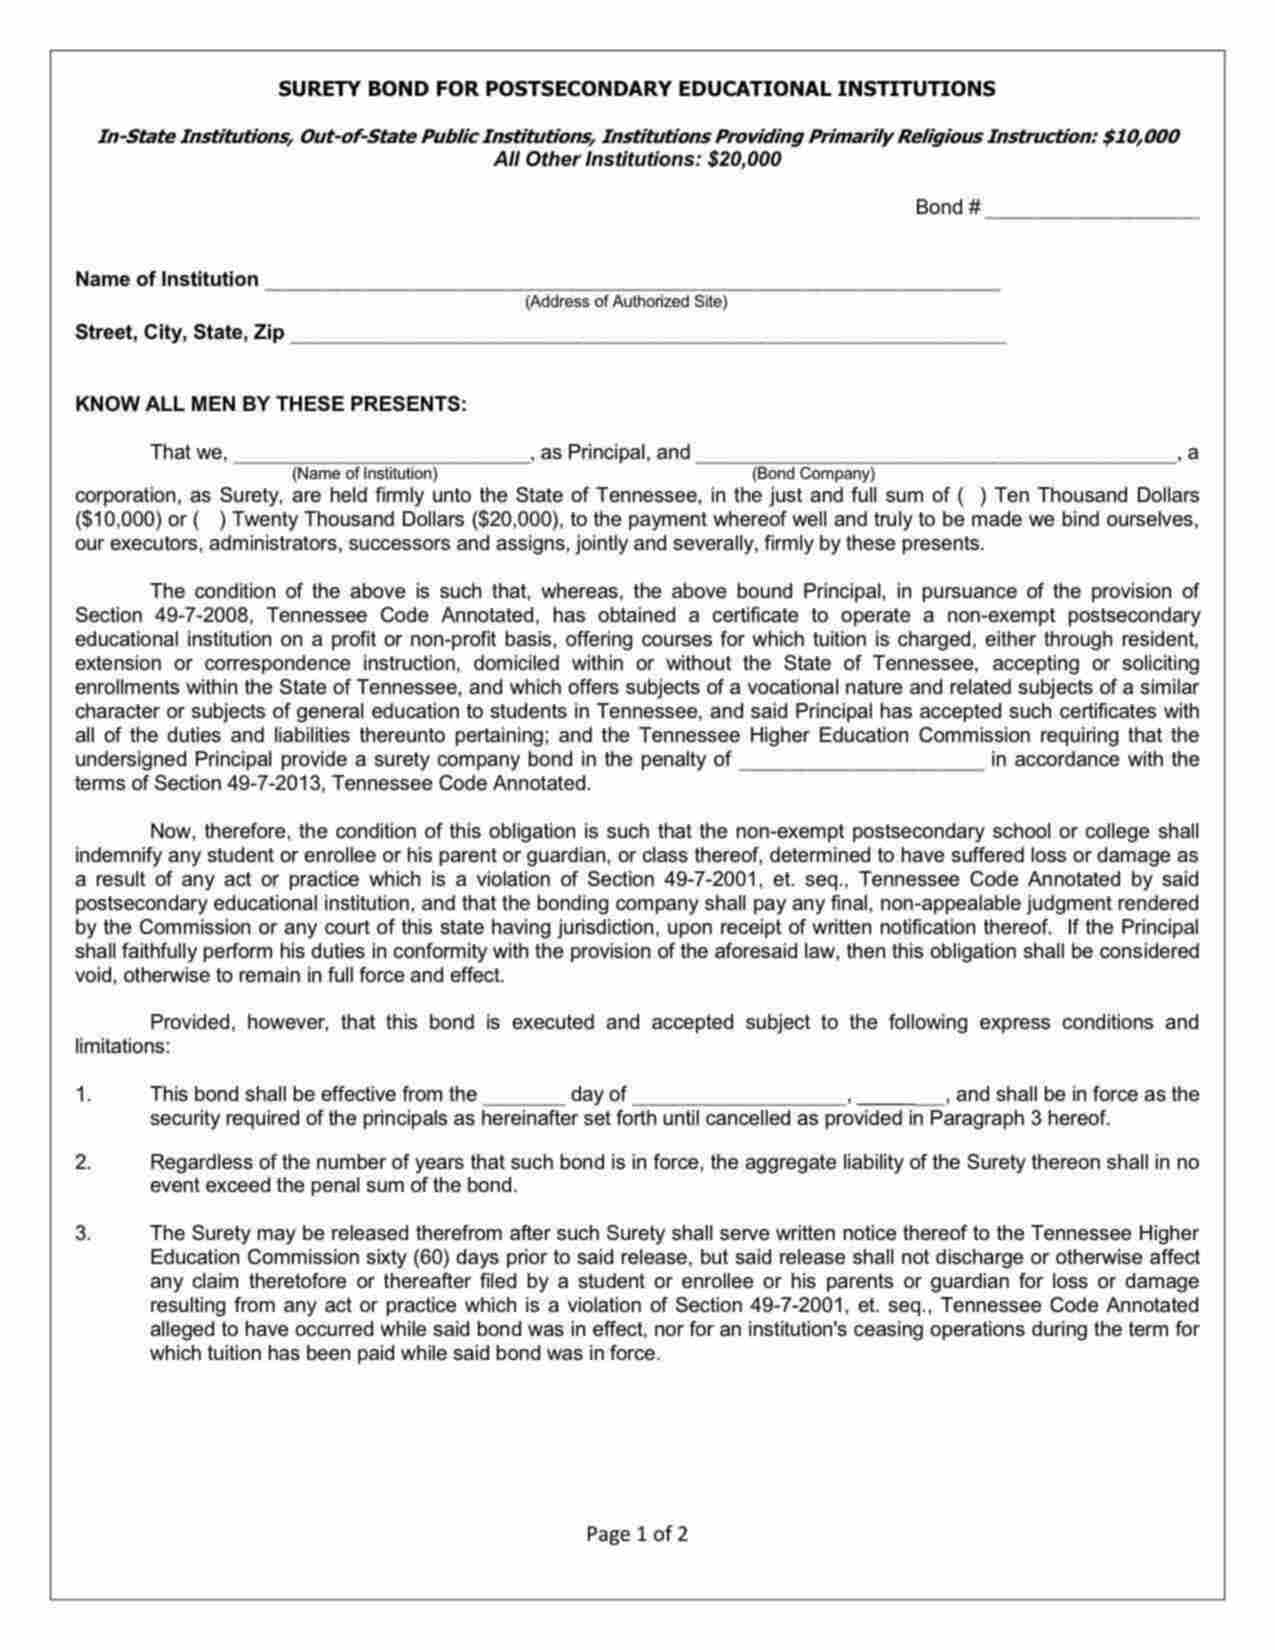 Tennessee Postsecondary Educational Institution Bond Form